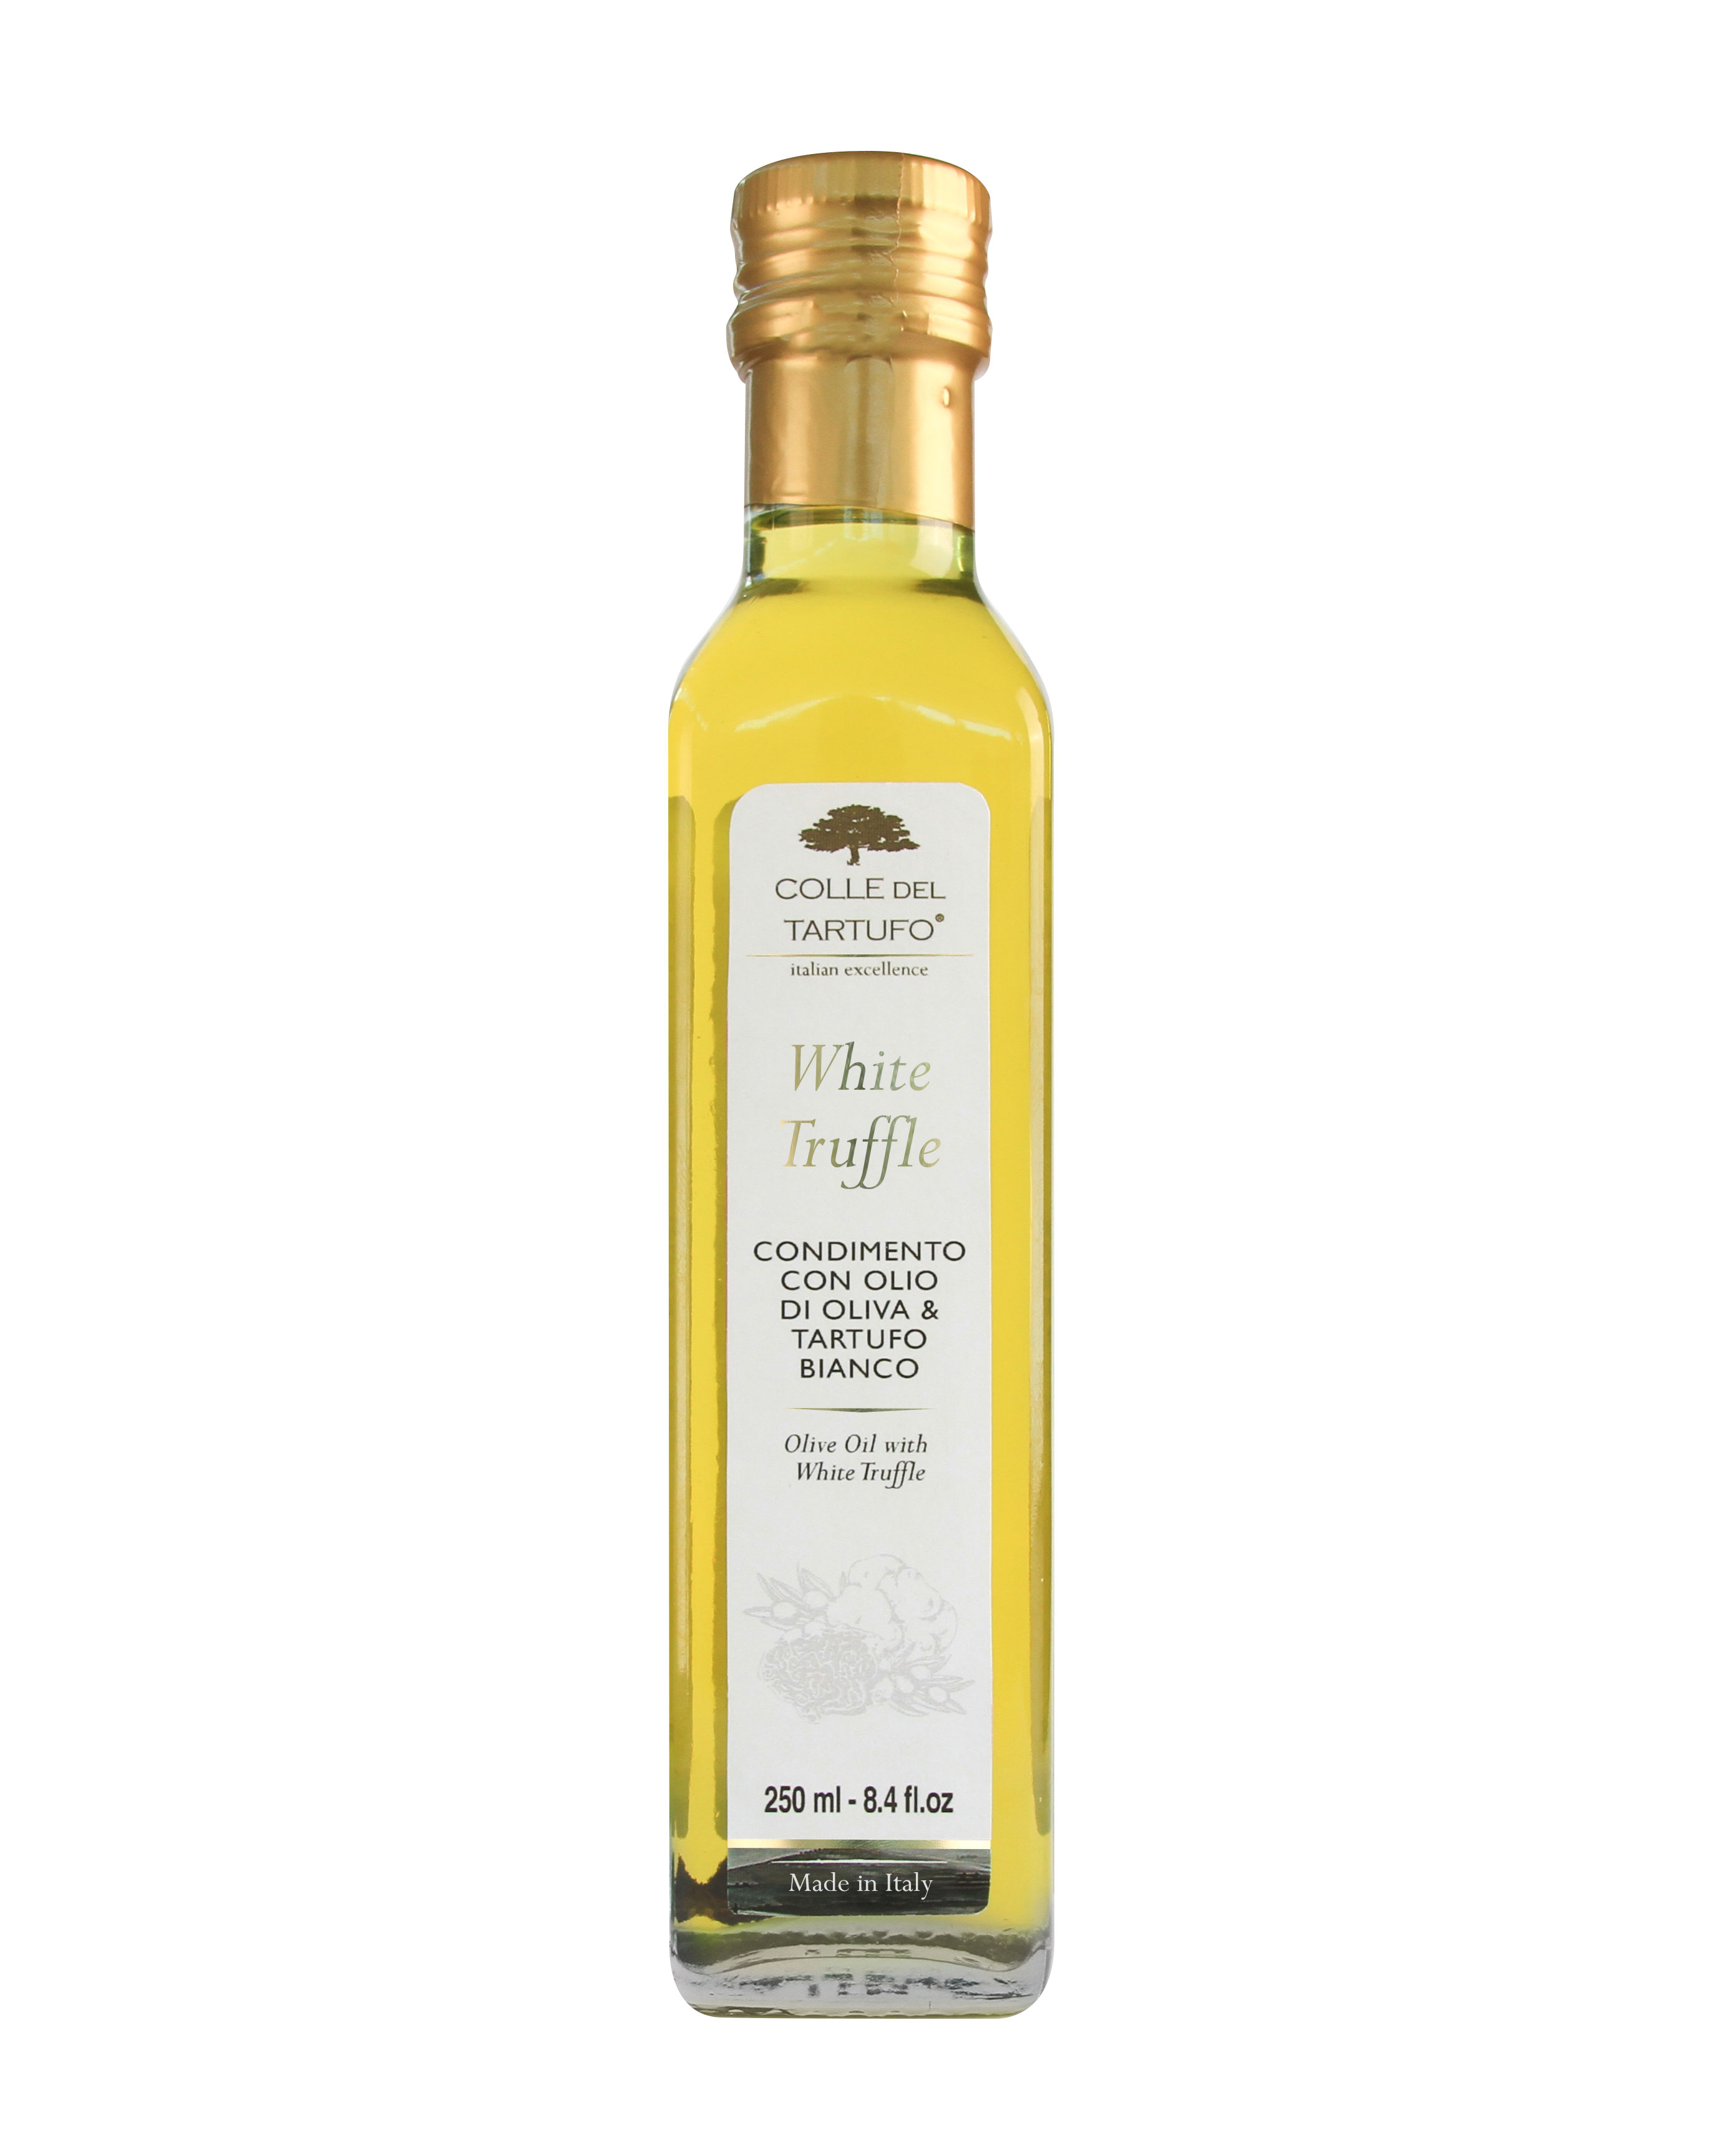 Olive Oil with White Truffle